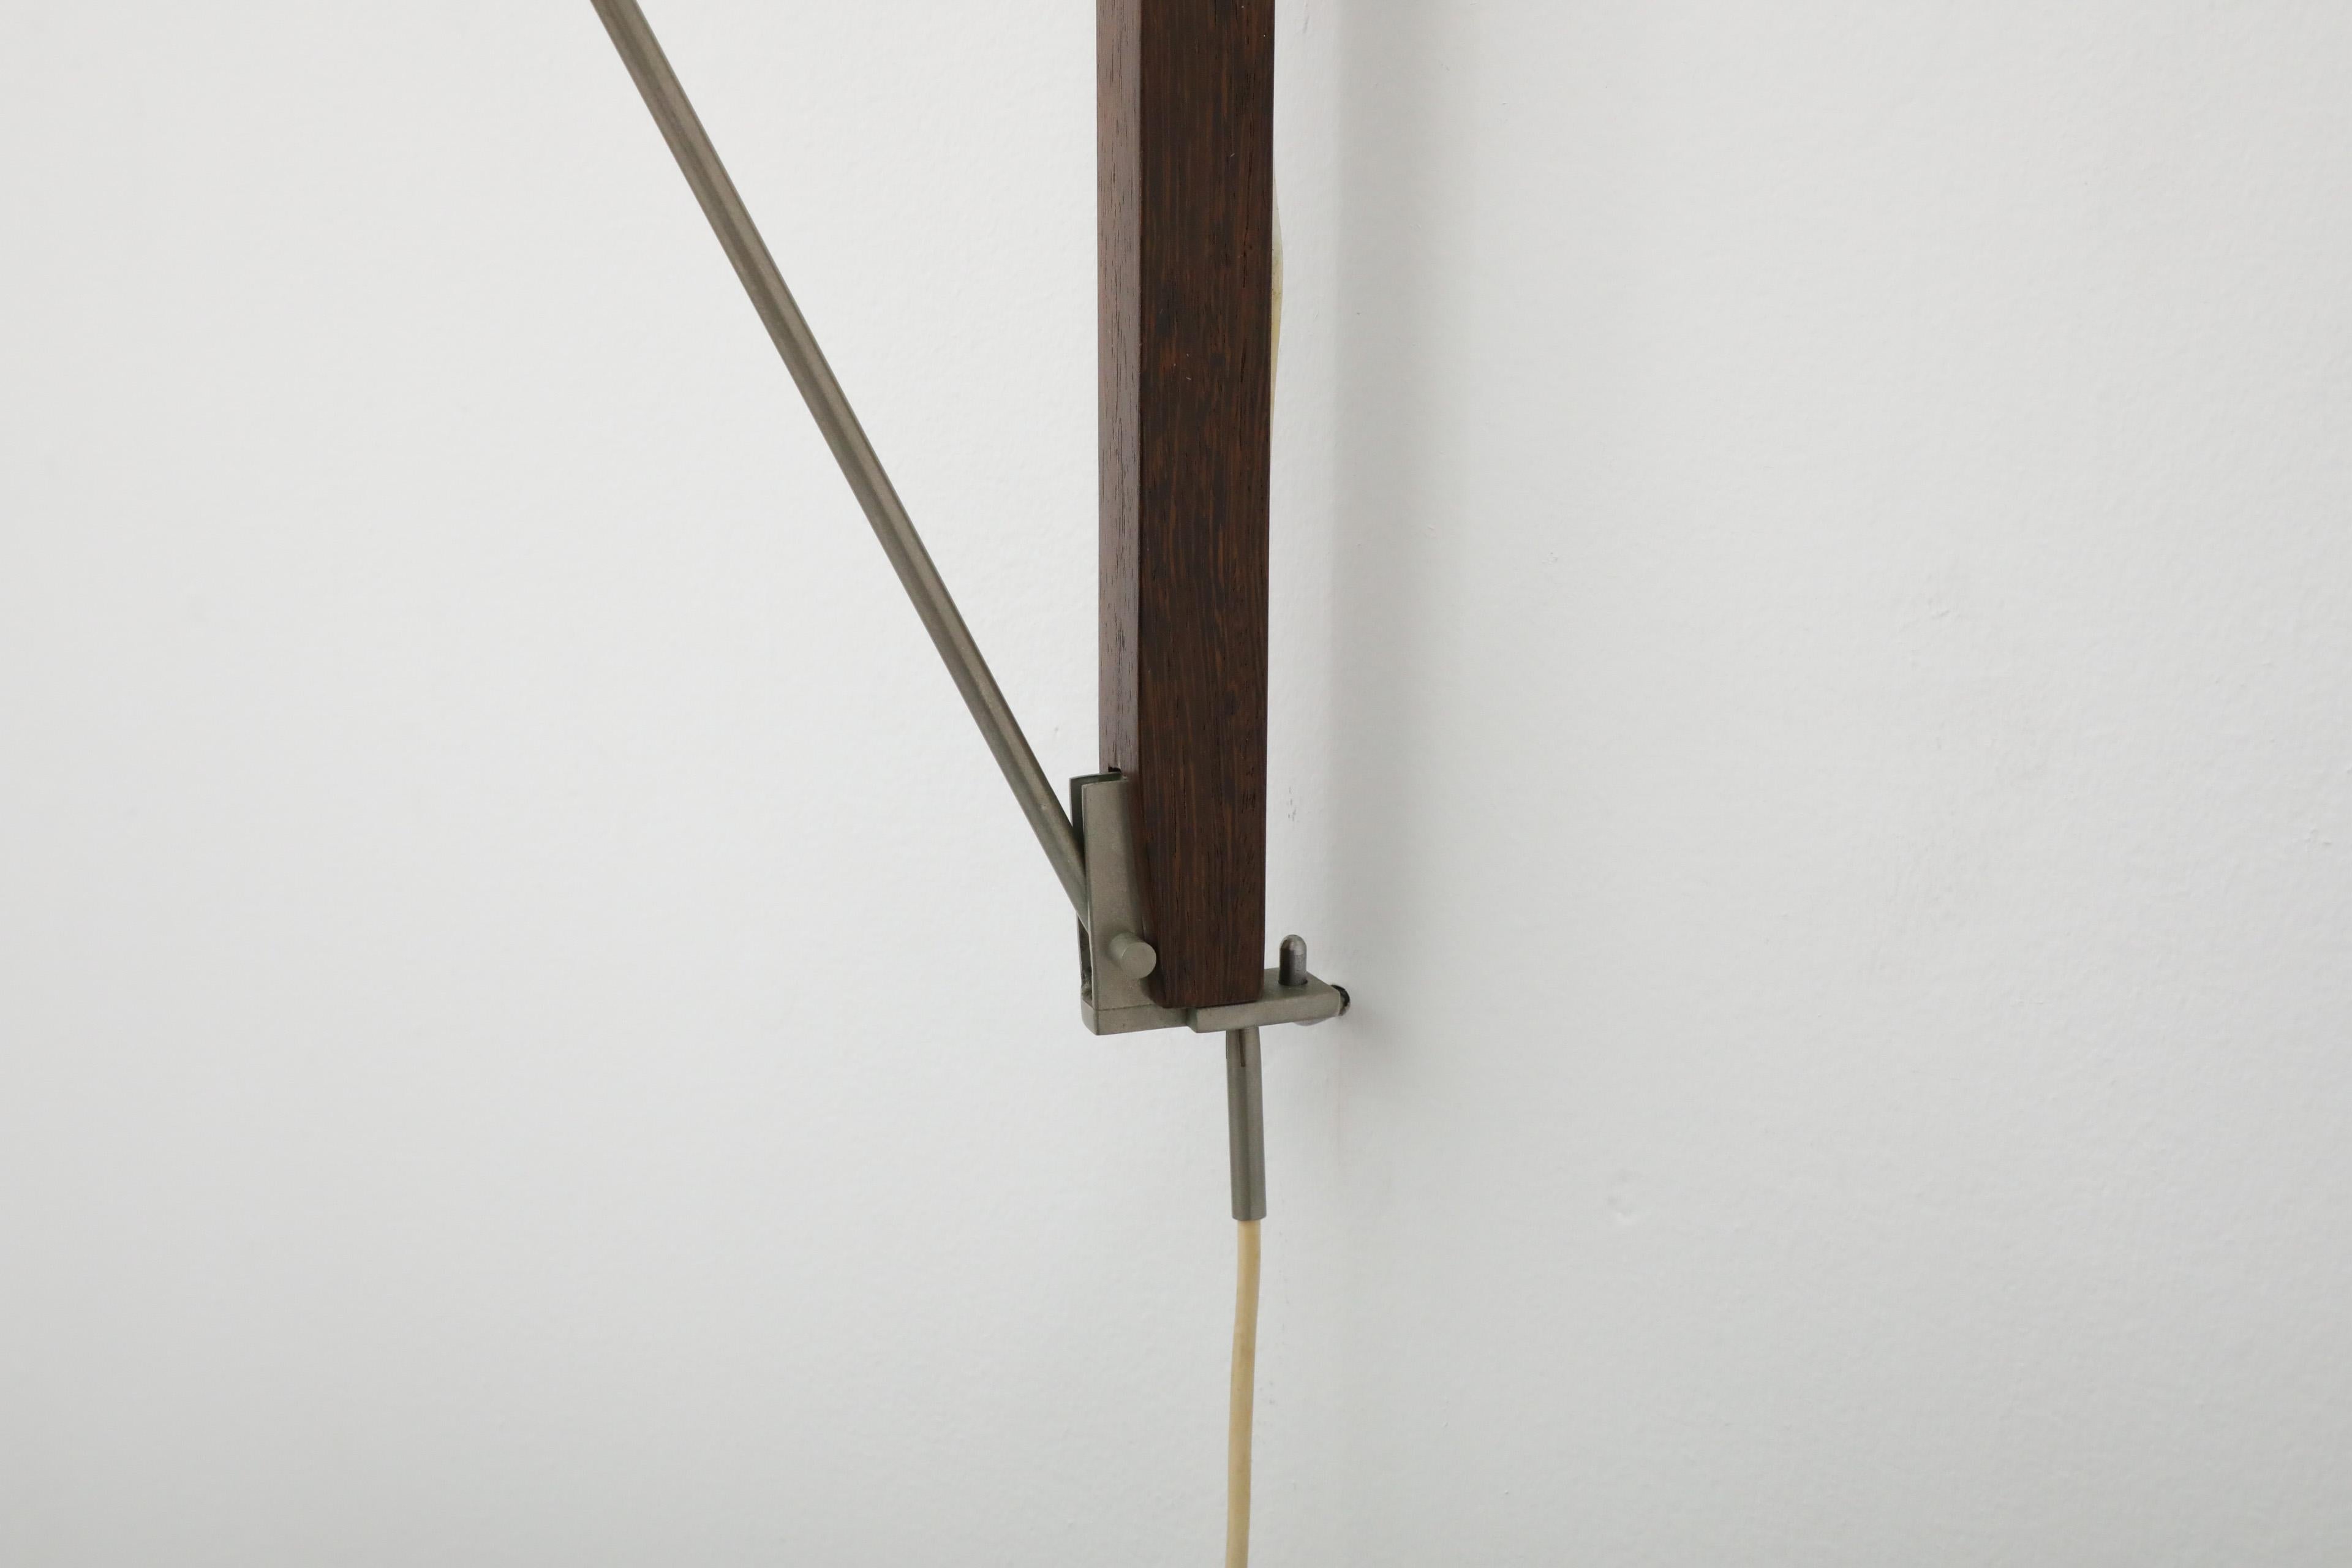 Rare Willem Hagoort Wall Sconce w/ White Enameled Metal Cone Shade & Teak Mount For Sale 11